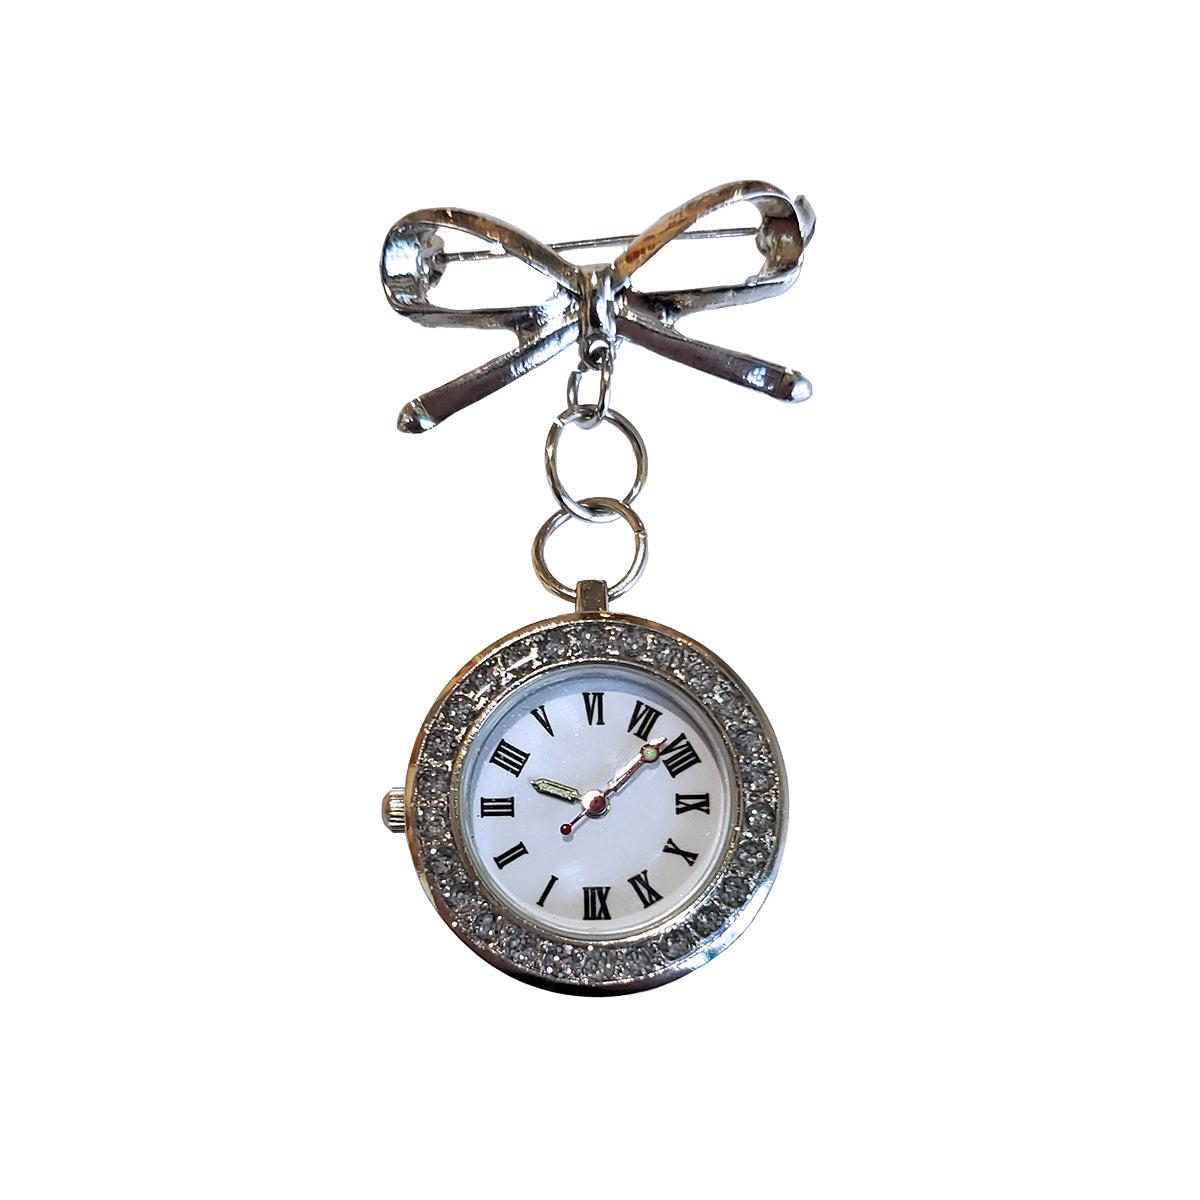 Anne Shirley Inspired Lapel Pin Watch